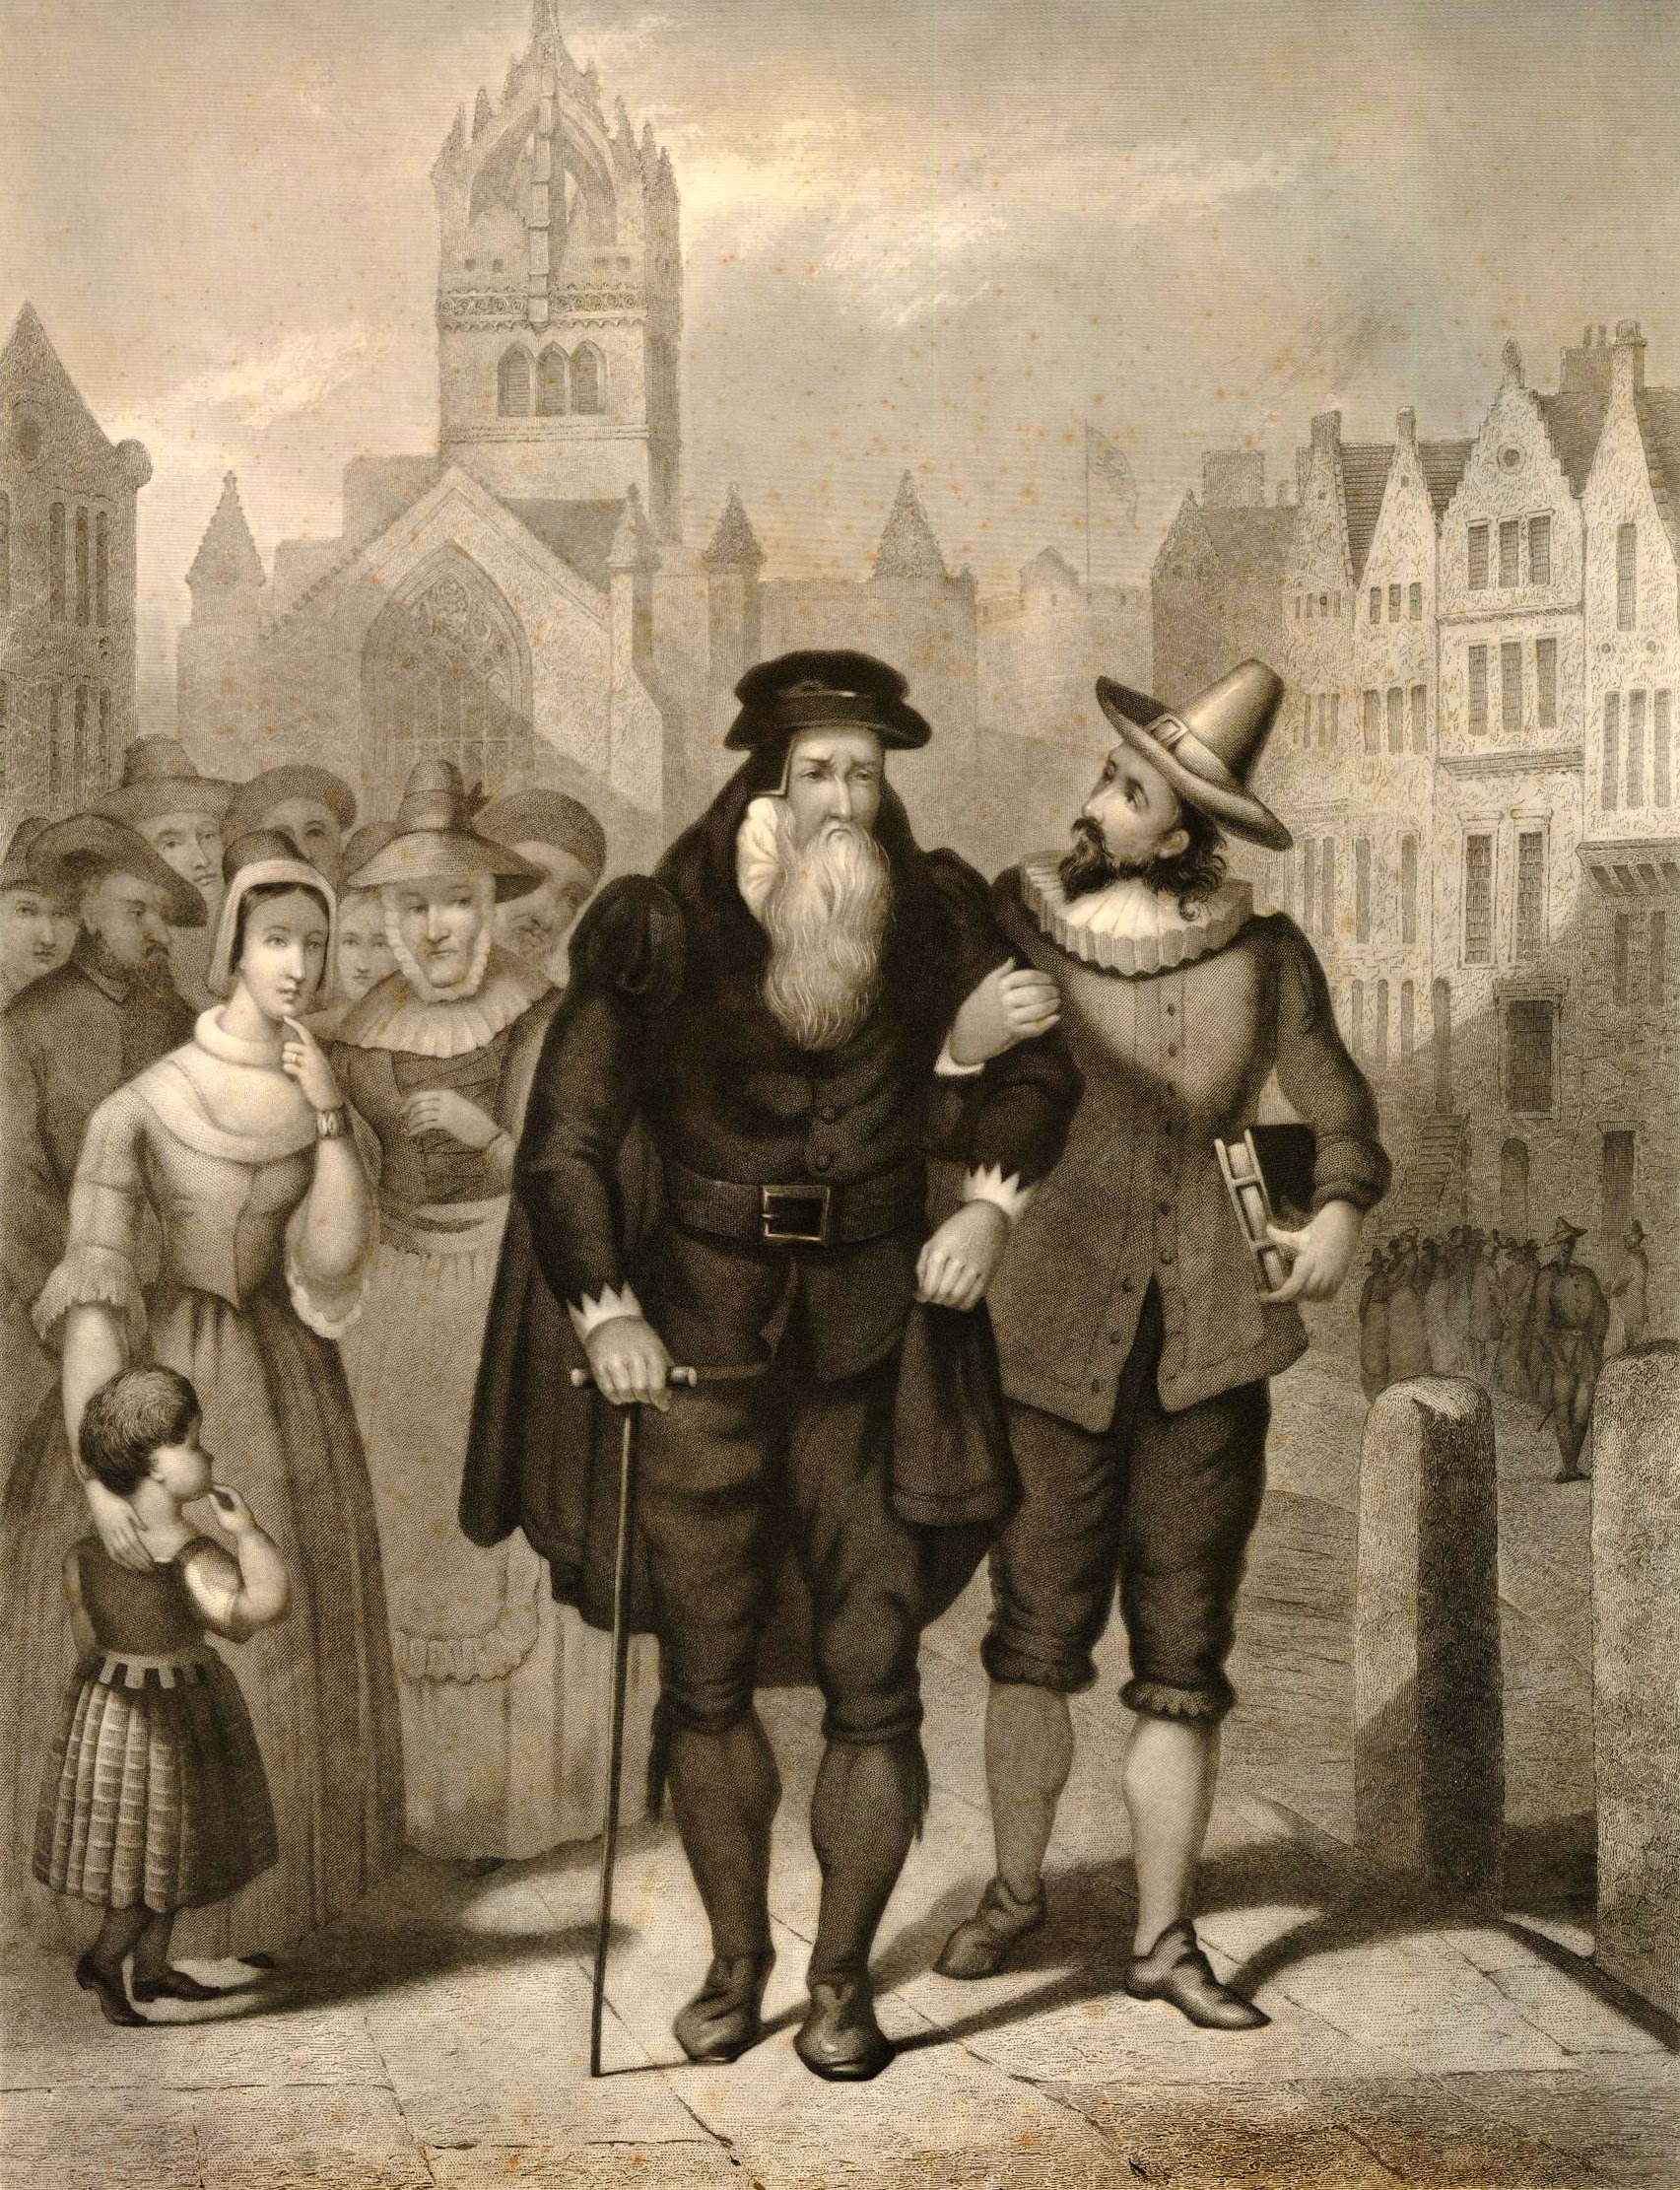 Depiction of John Knox, an elderly bearded figure, walking with the aid of a stick and supported by a younger man on his right. Knox appears to be returning home after delivering his last sermon. A concerned group of men and women look on as they pass. The backdrop showcases a view of Edinburgh, with the city's cathedral prominently featured.